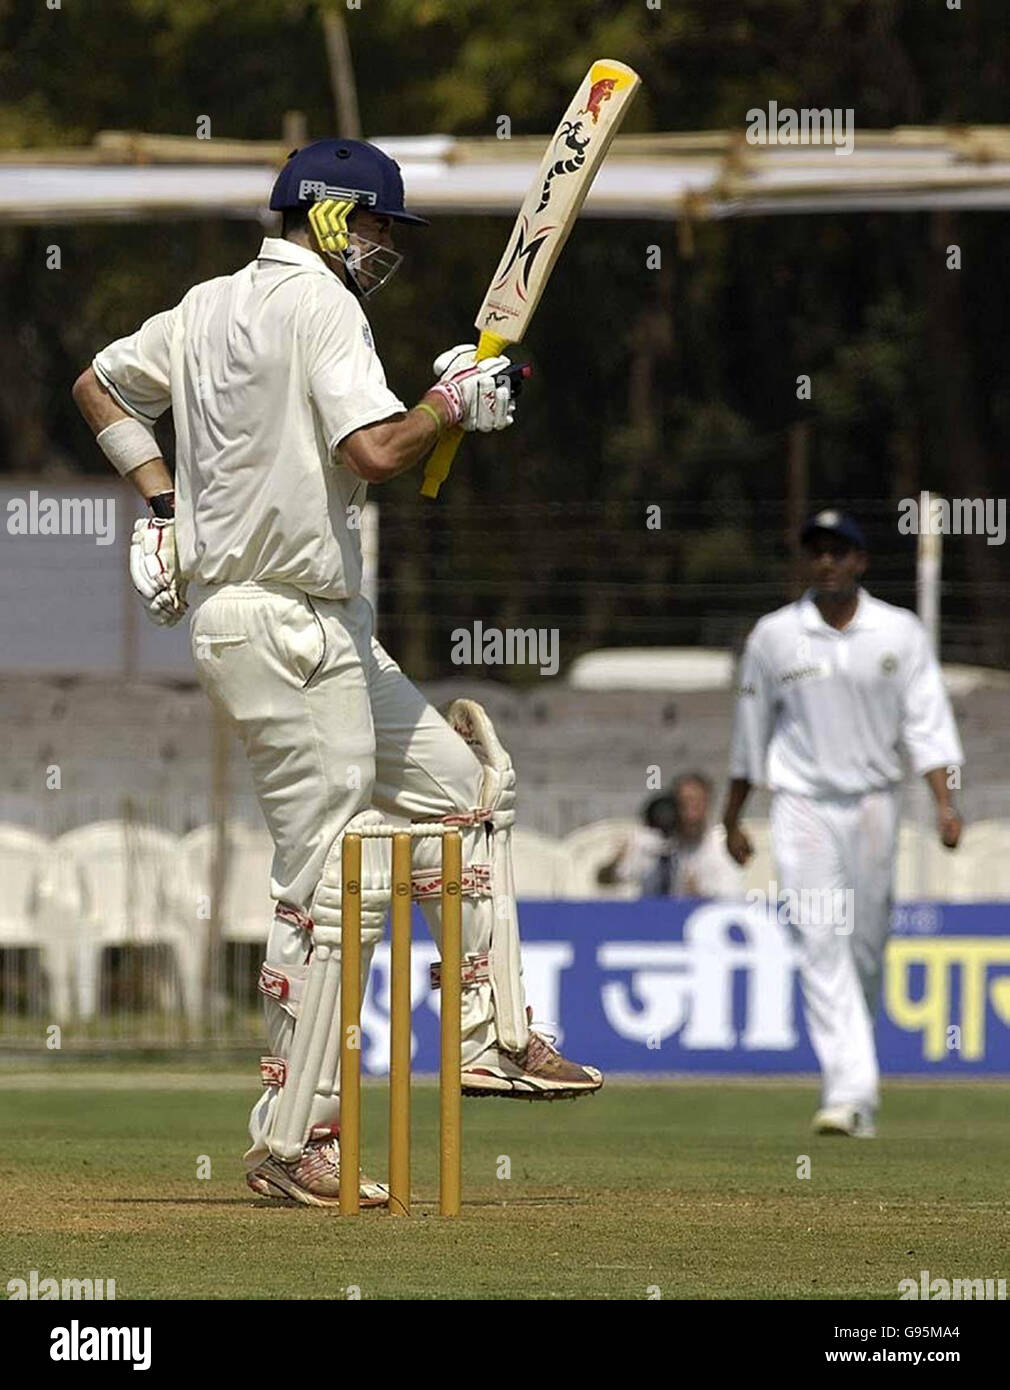 England's Kevin Pietersen shows discomfort while batting before retiring hurt, during the first day of the tour match against the Indian Board President's XI at the IPCL Cricket ground, Baroda, India, Thursday February 23, 2006. With less than a week to go before the first Test in Nagpur, Pietersen's slight back niggle worsened while batting. See PA story CRICKET England. PRESS ASSOCIATION Photo. Photo credit should read: Rebecca Naden/PA. Stock Photo